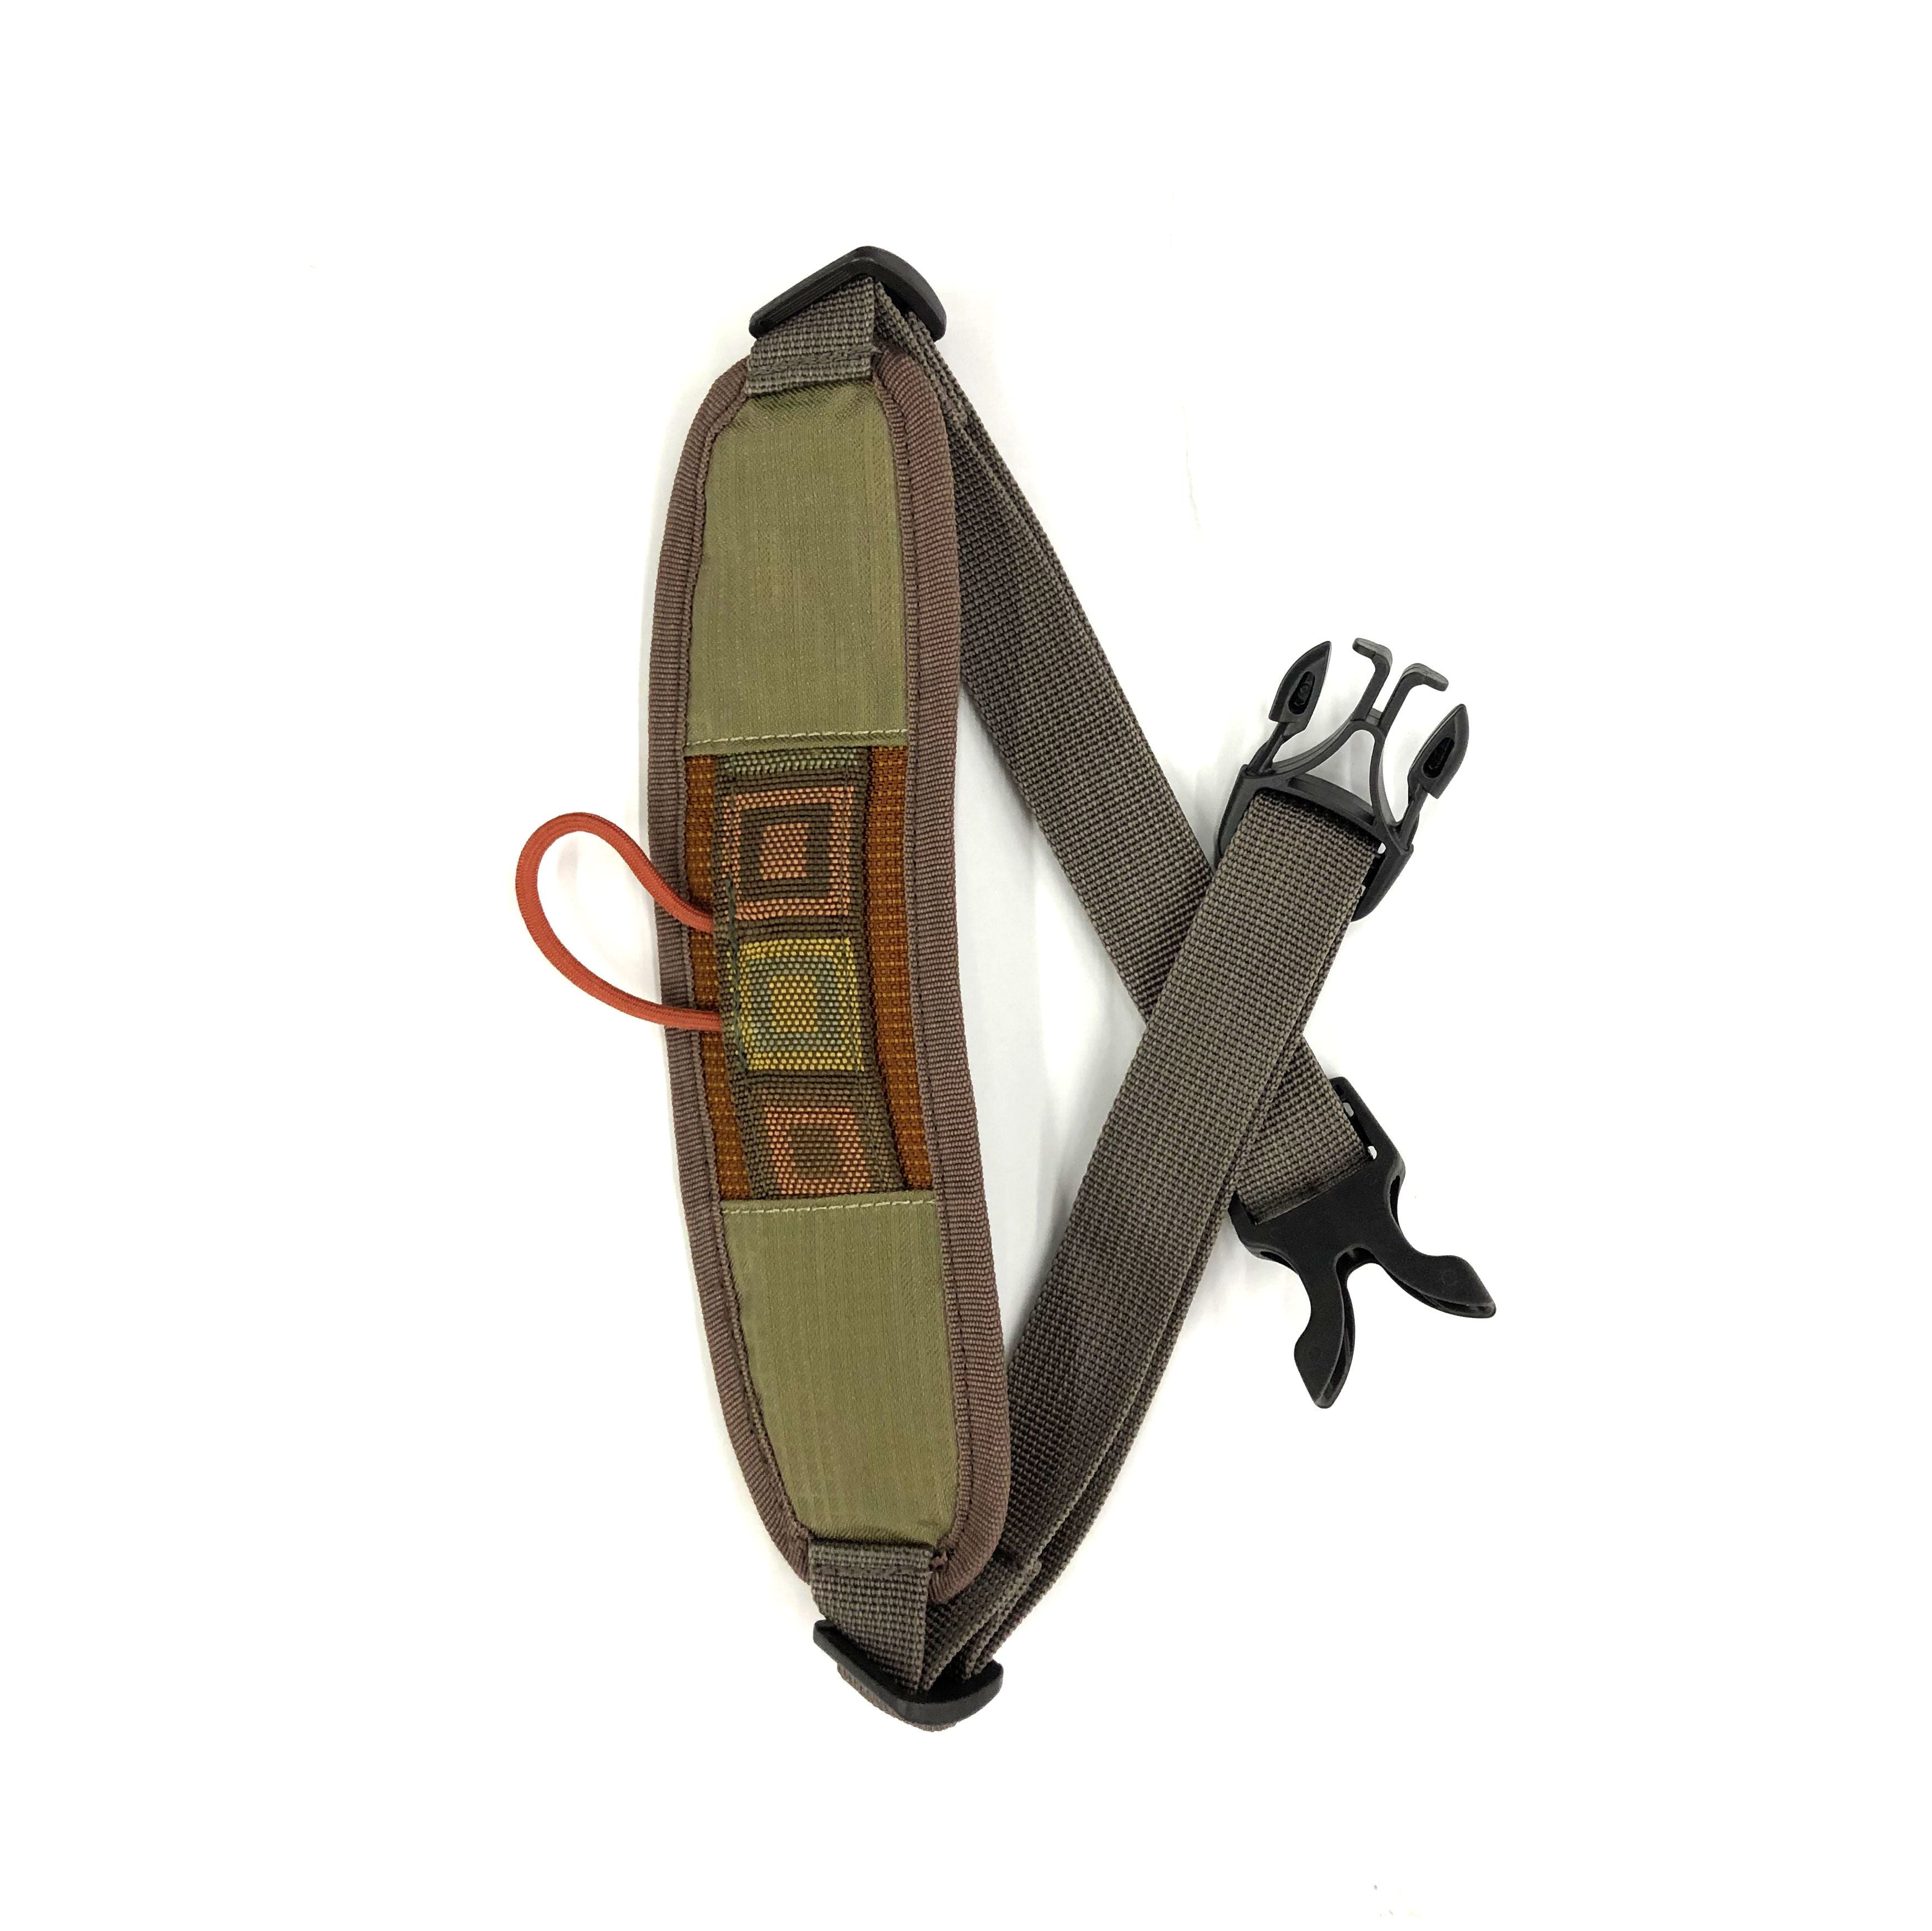 Fishpond Arroyo Fly Fishing Chest Pack - sporting goods - by owner - sale -  craigslist